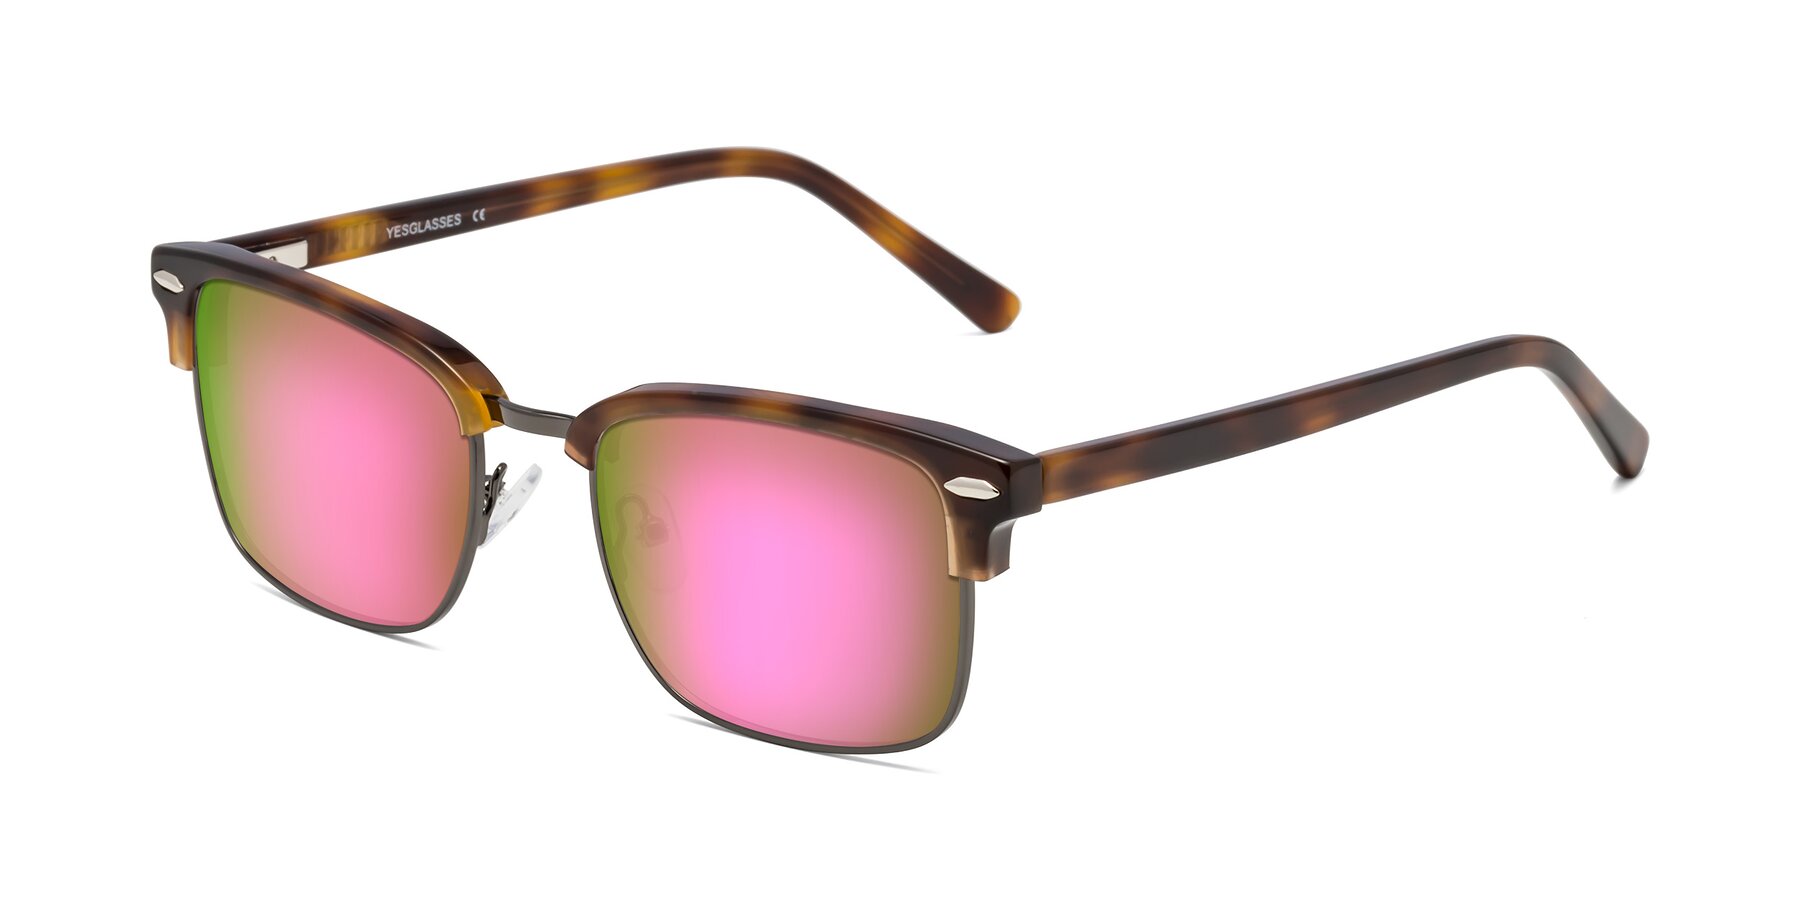 Angle of 17464 in Tortoise/ Gunmetal with Pink Mirrored Lenses